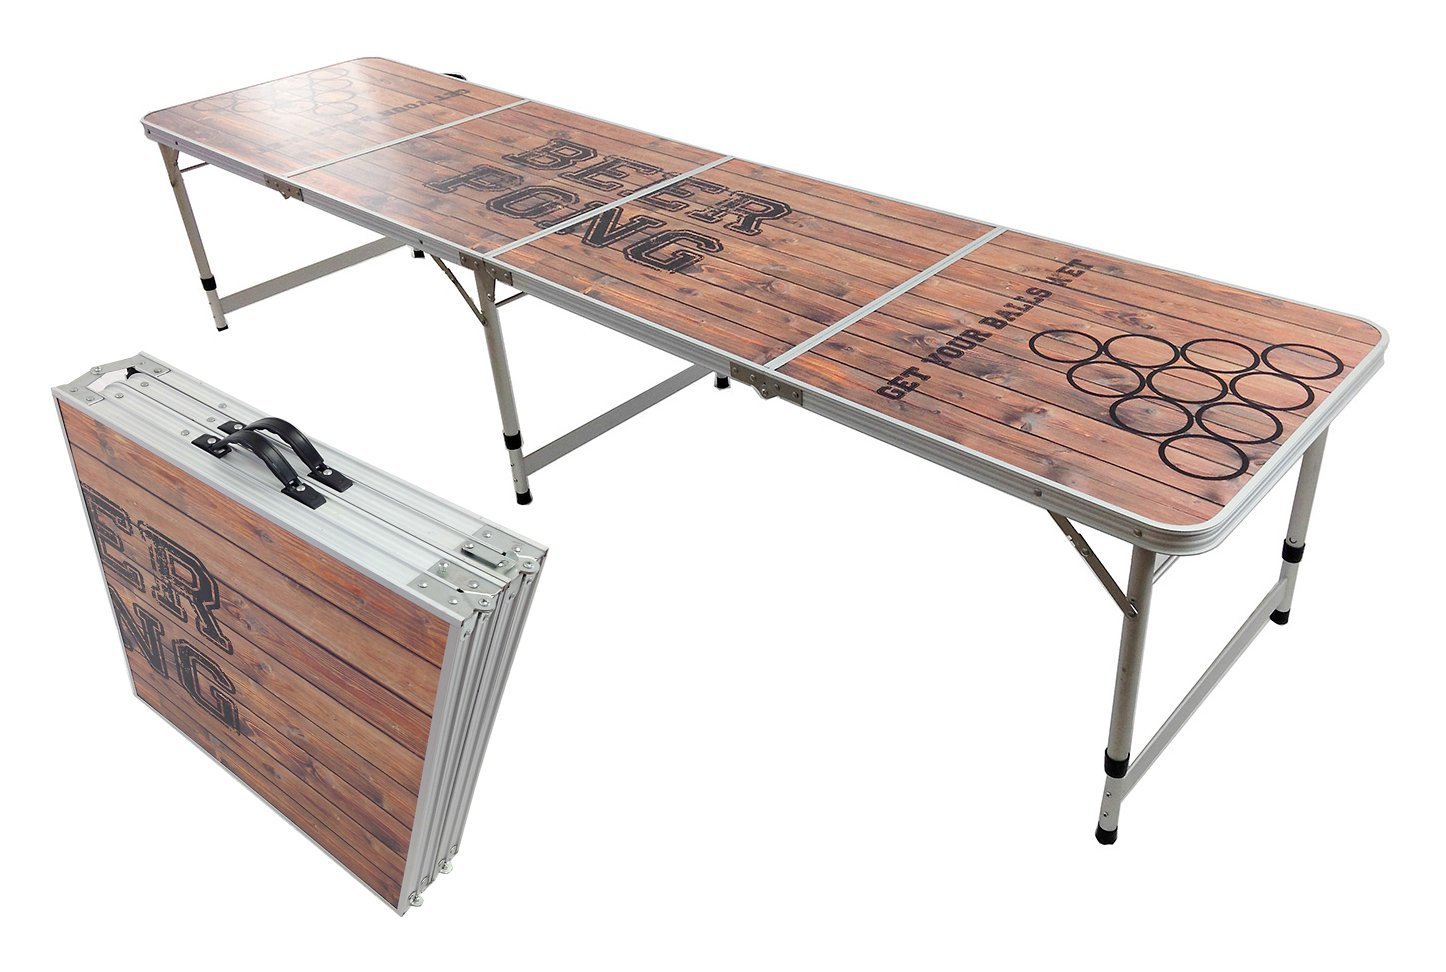 How To Make A Collapsible Beer Pong Table